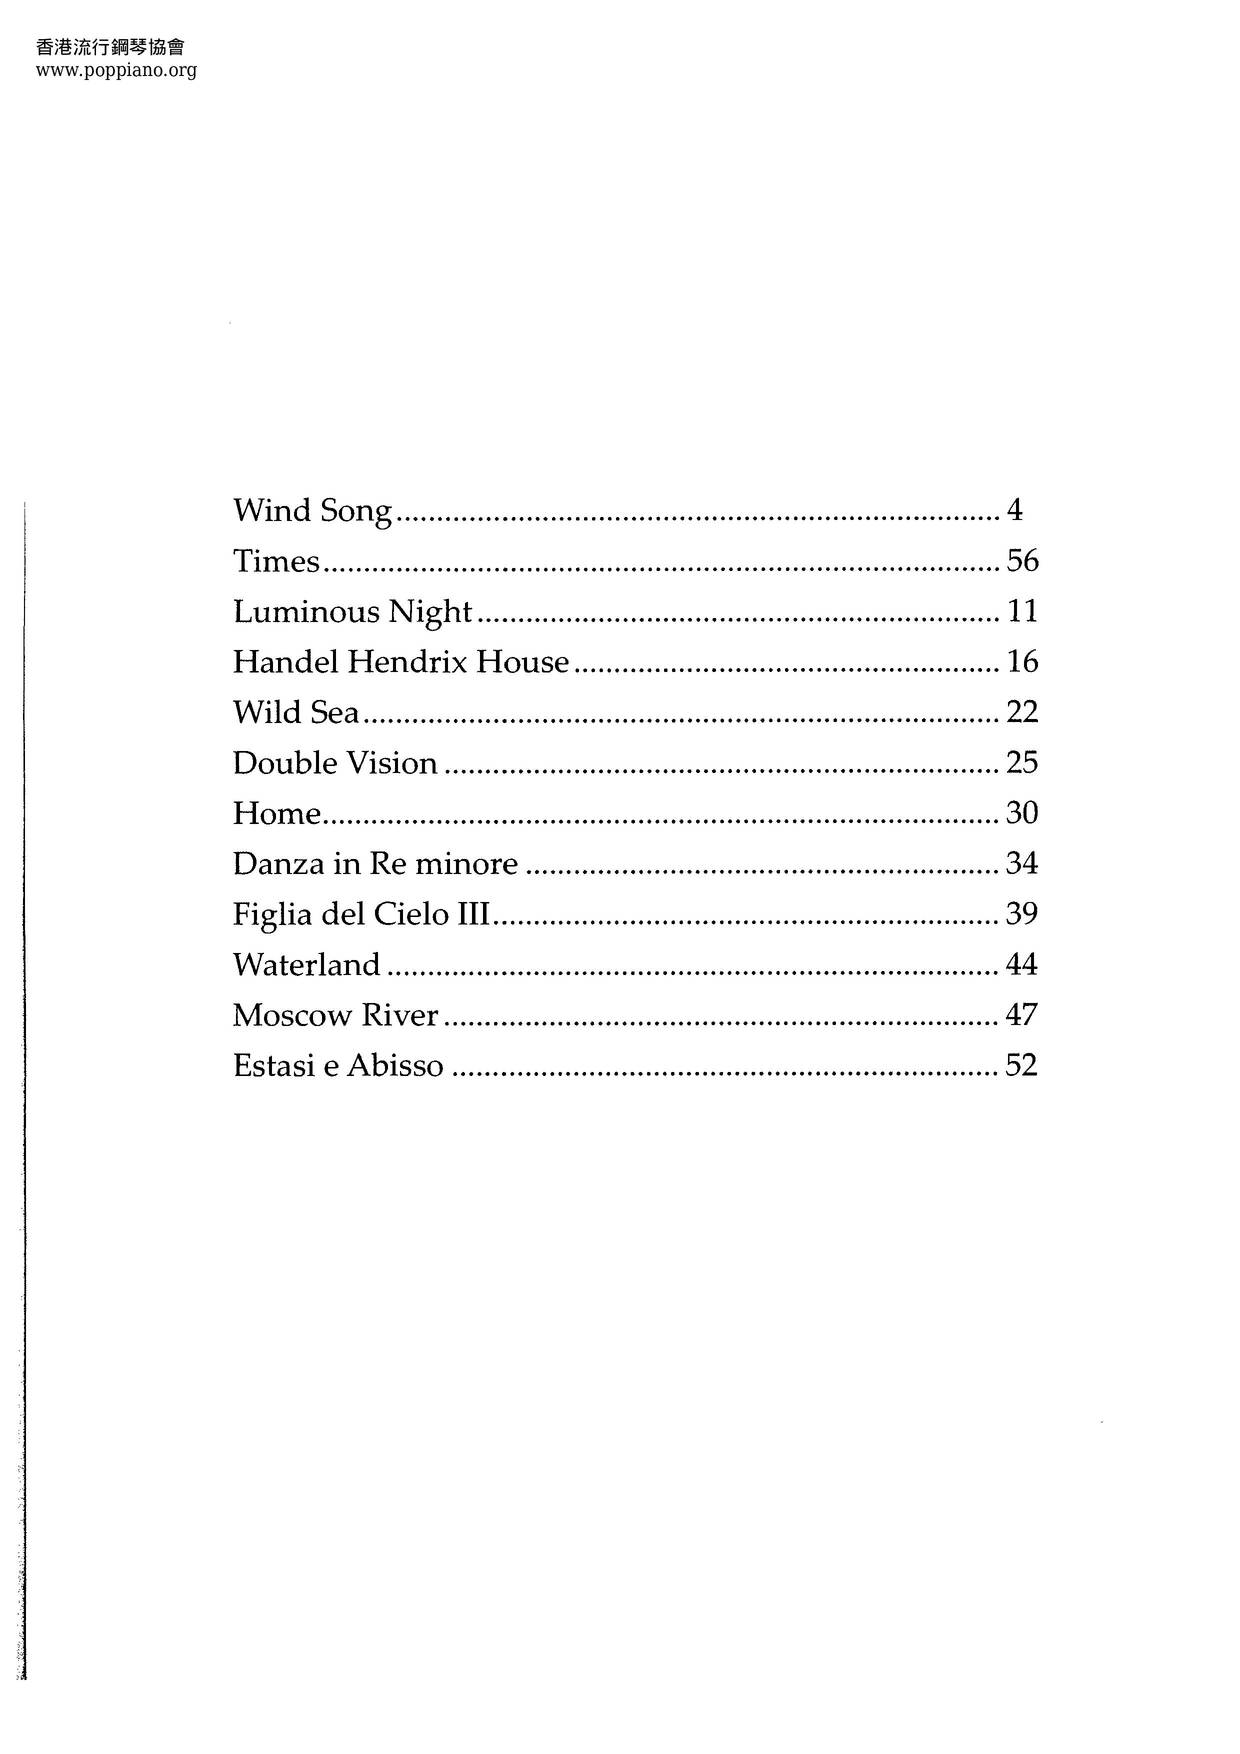 Ten Directions Book 66 Pages Score